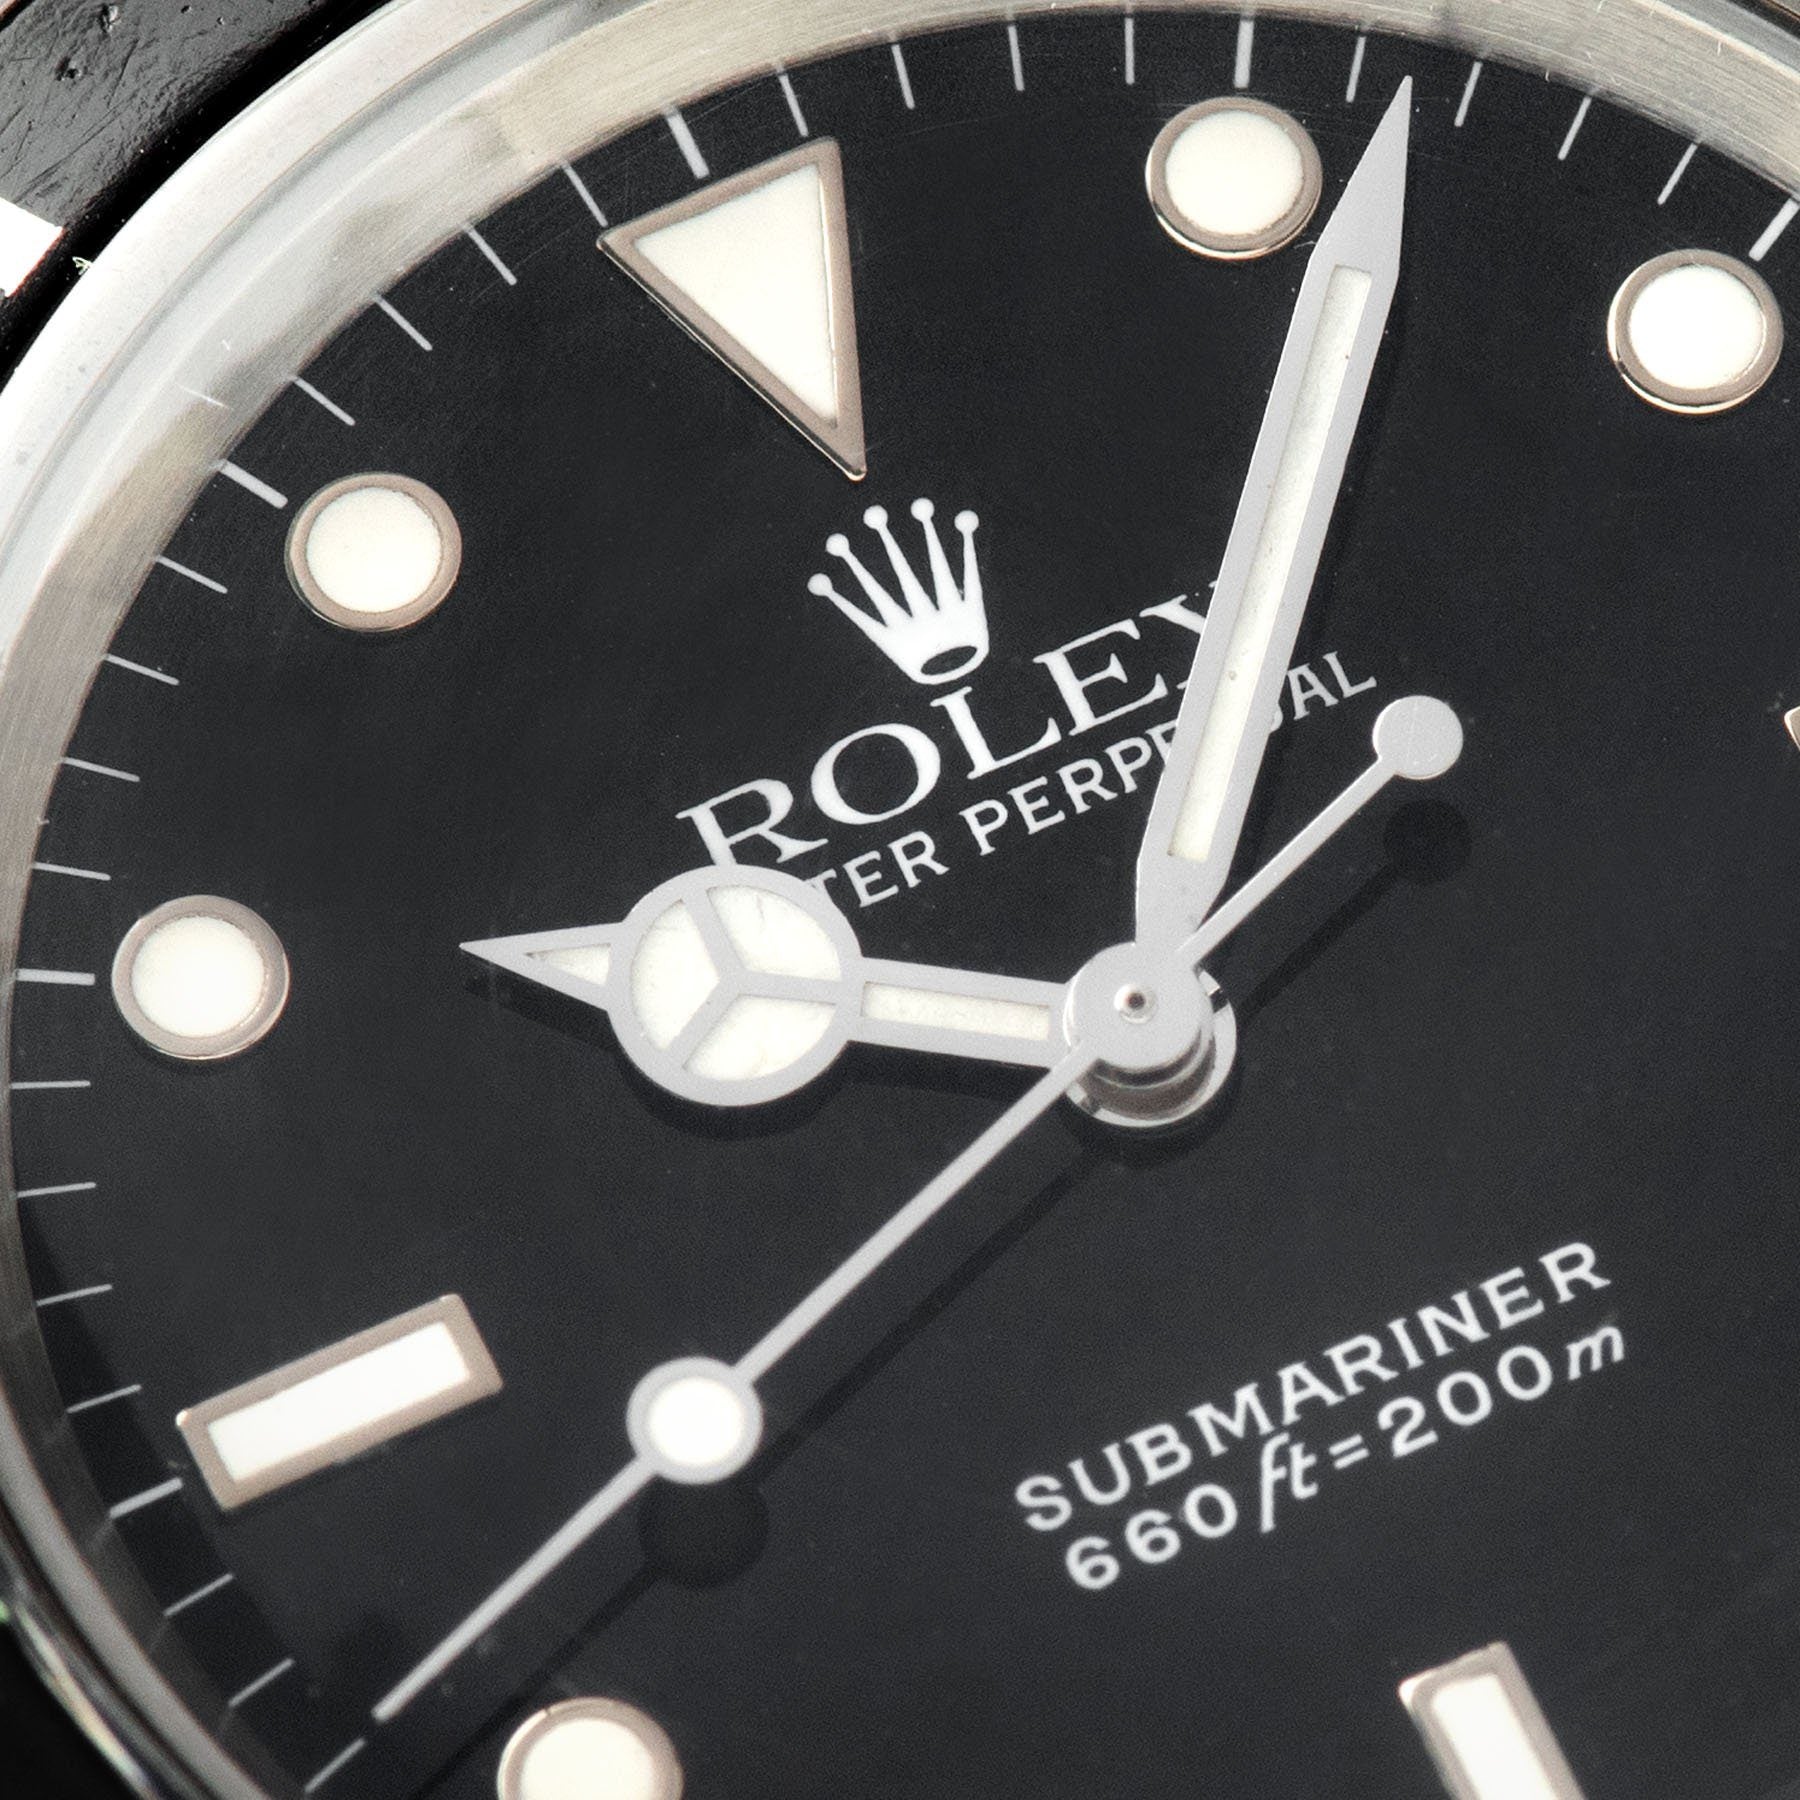 Rolex Submariner 5513 Gloss Dial Box and Papers